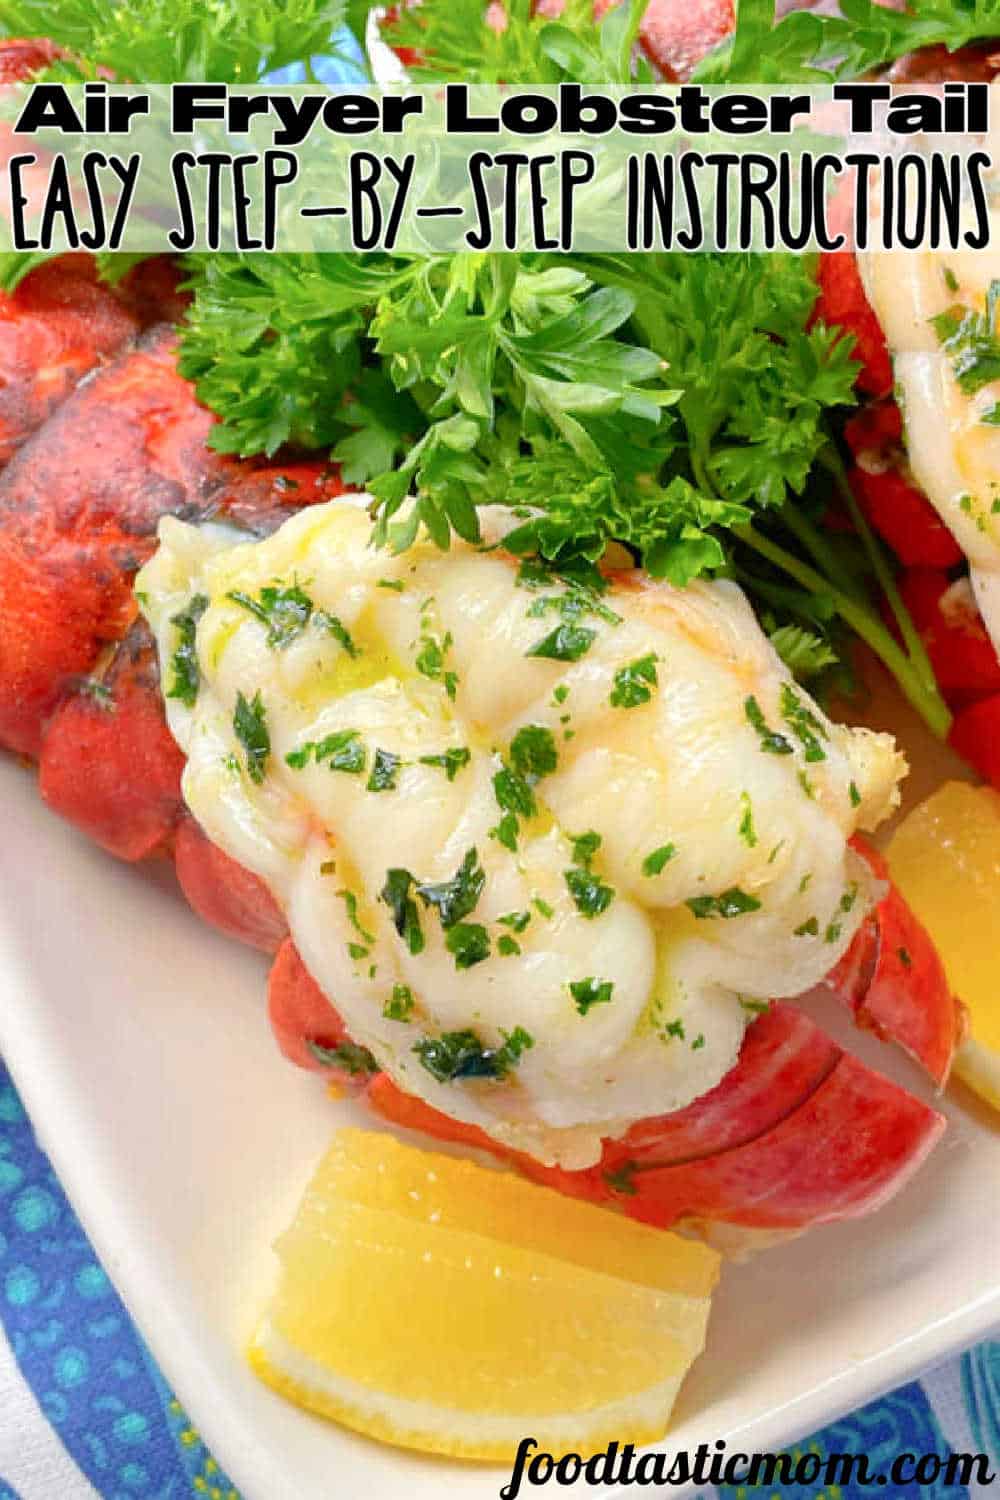 Air Fryer Lobster Tail | Foodtastic Mom #airfryerrecipes #lobstertails #howtocooklobstertail #howtobutterflylobstertail #airfryerlobstertail via @foodtasticmom